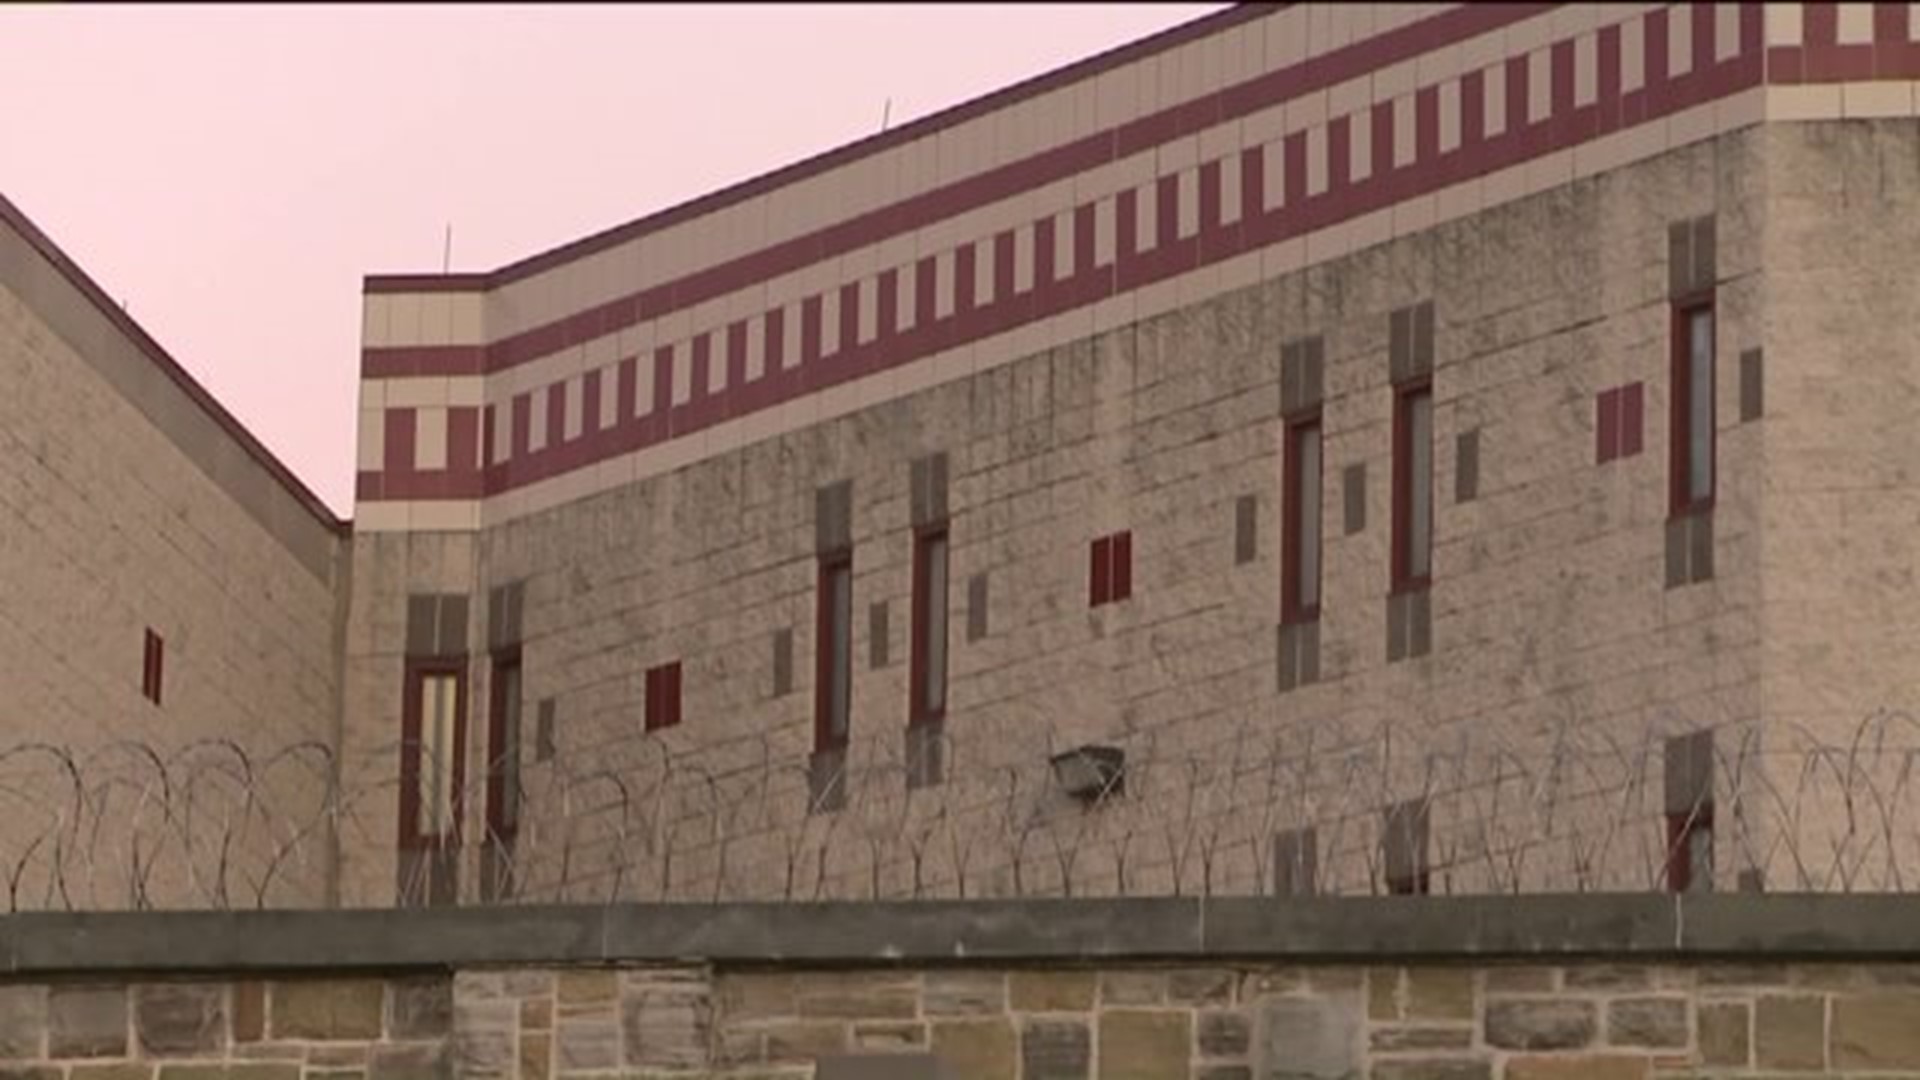 Former Corrections Officer Accused of Striking Inmate